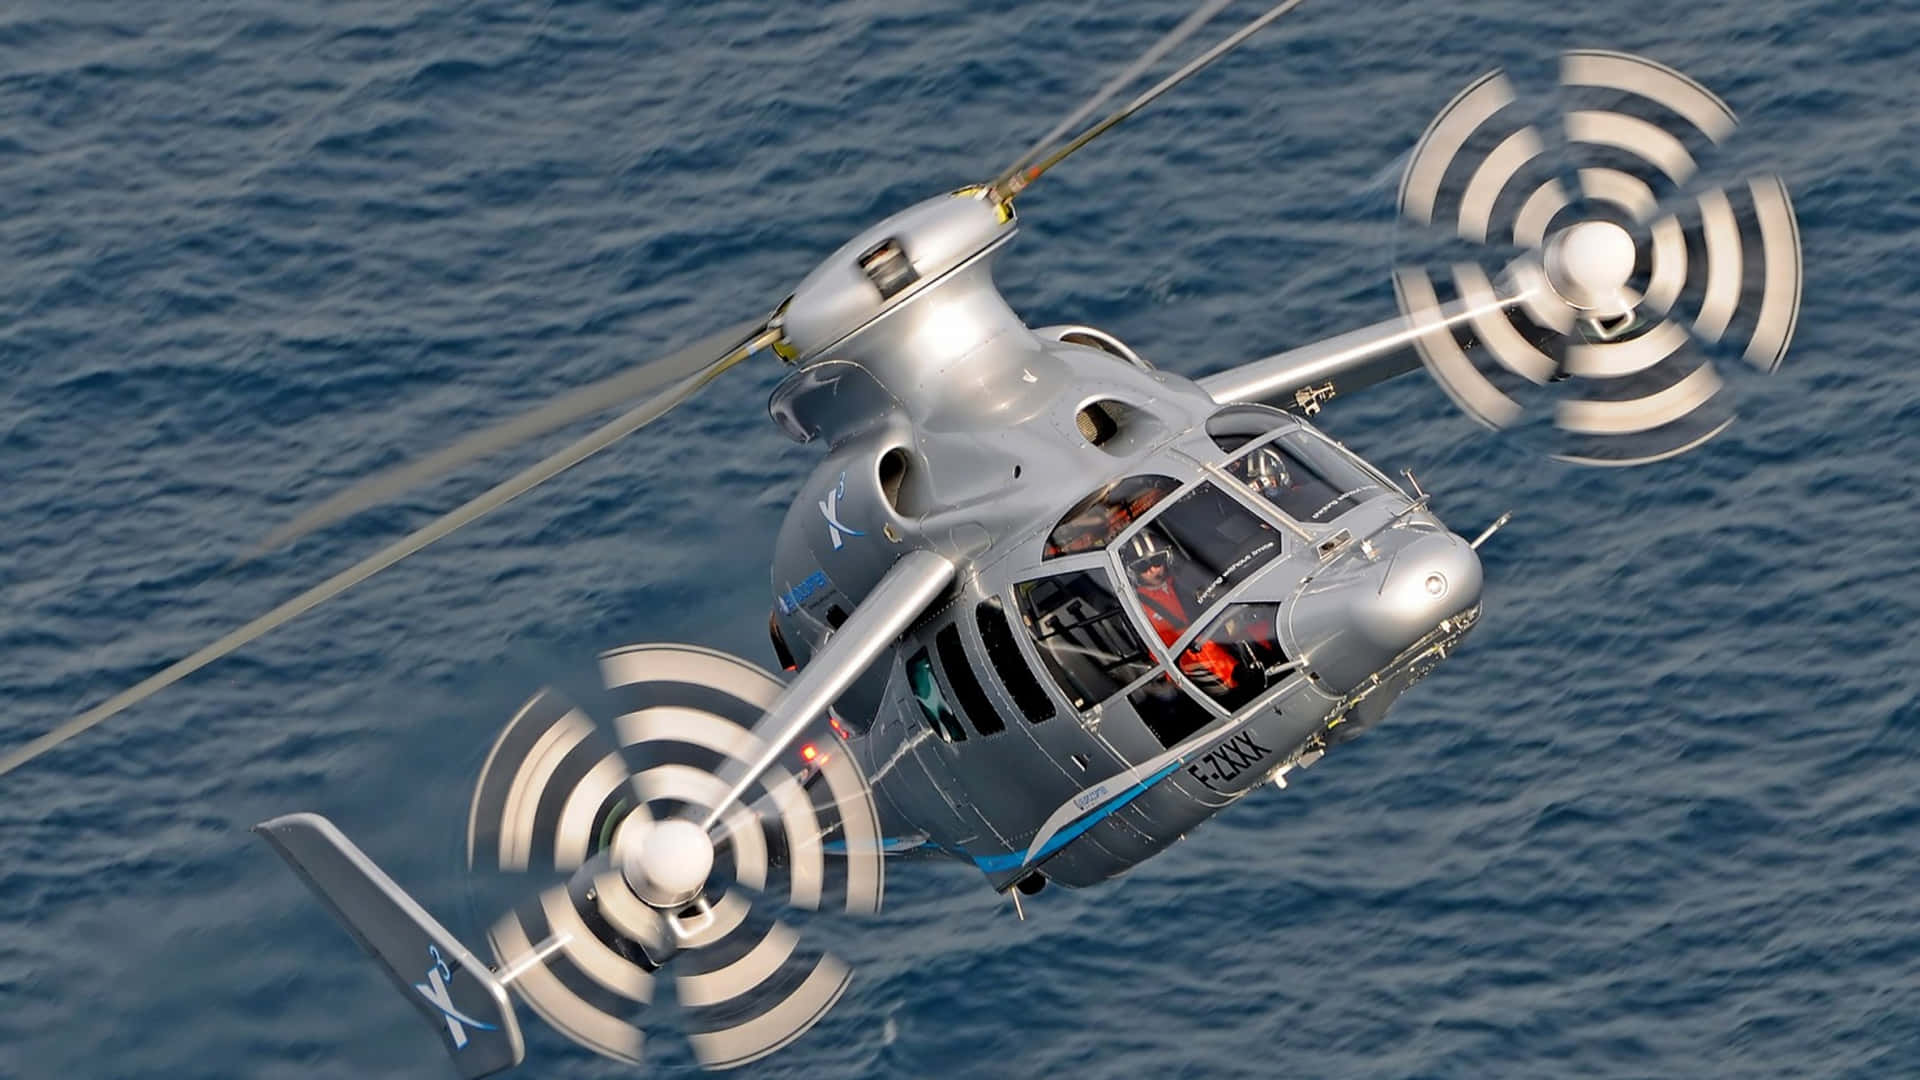 Enjoy a breathtaking aerial view of a 4k Helicopter